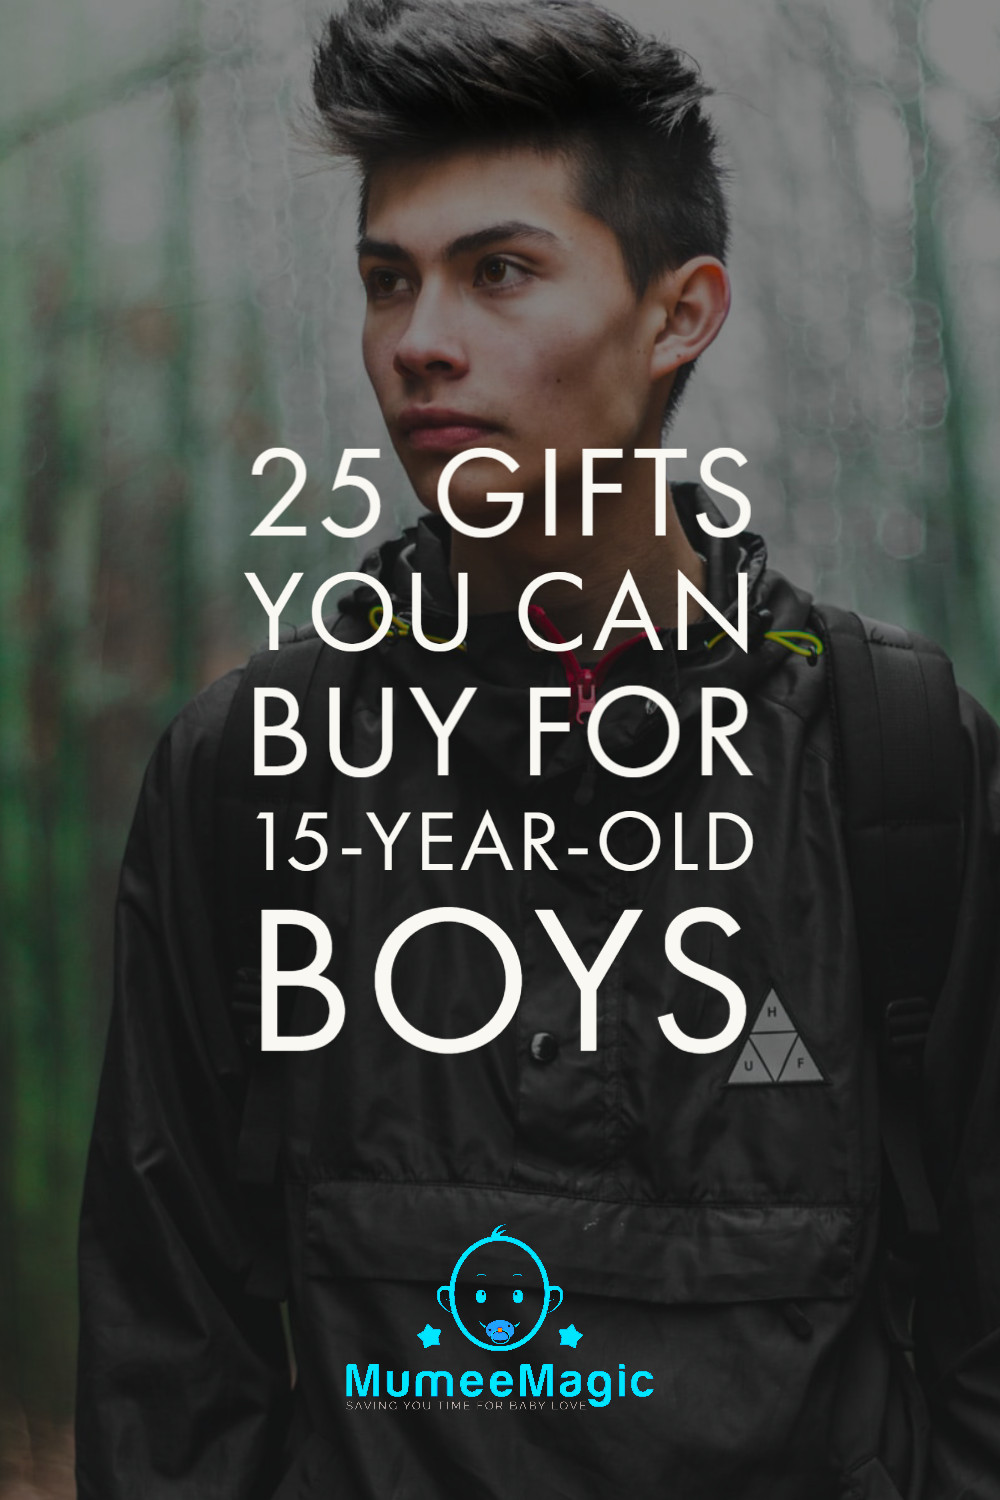 Gift Ideas For 15 Year Old Boys
 Pin on Toys and Gift Ideas